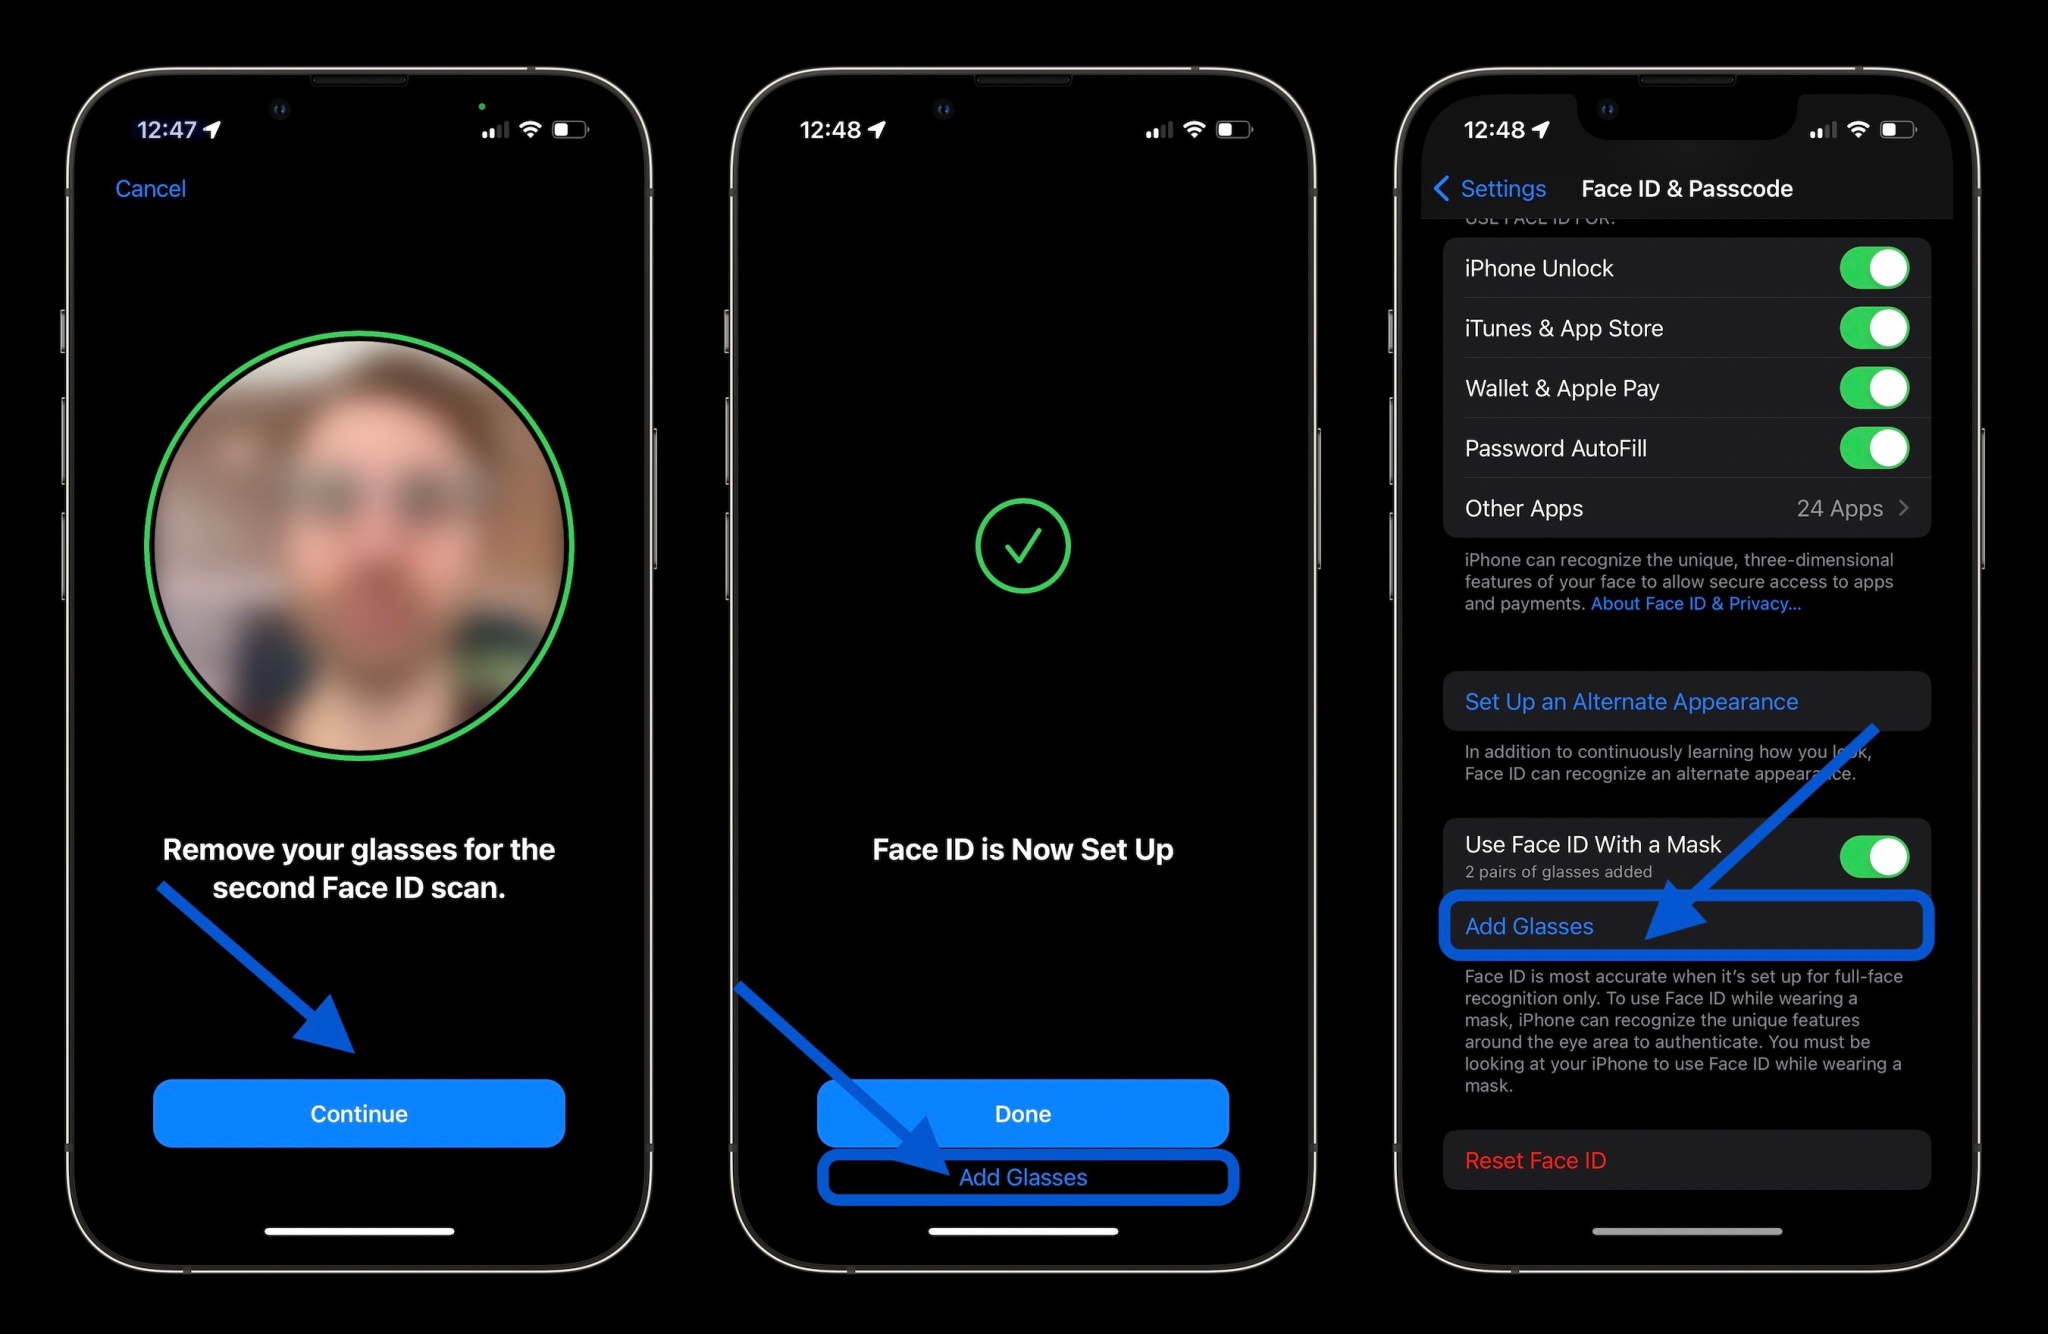 how to use face id with mask iphone ios 15 4 walkthrough 2 Maske